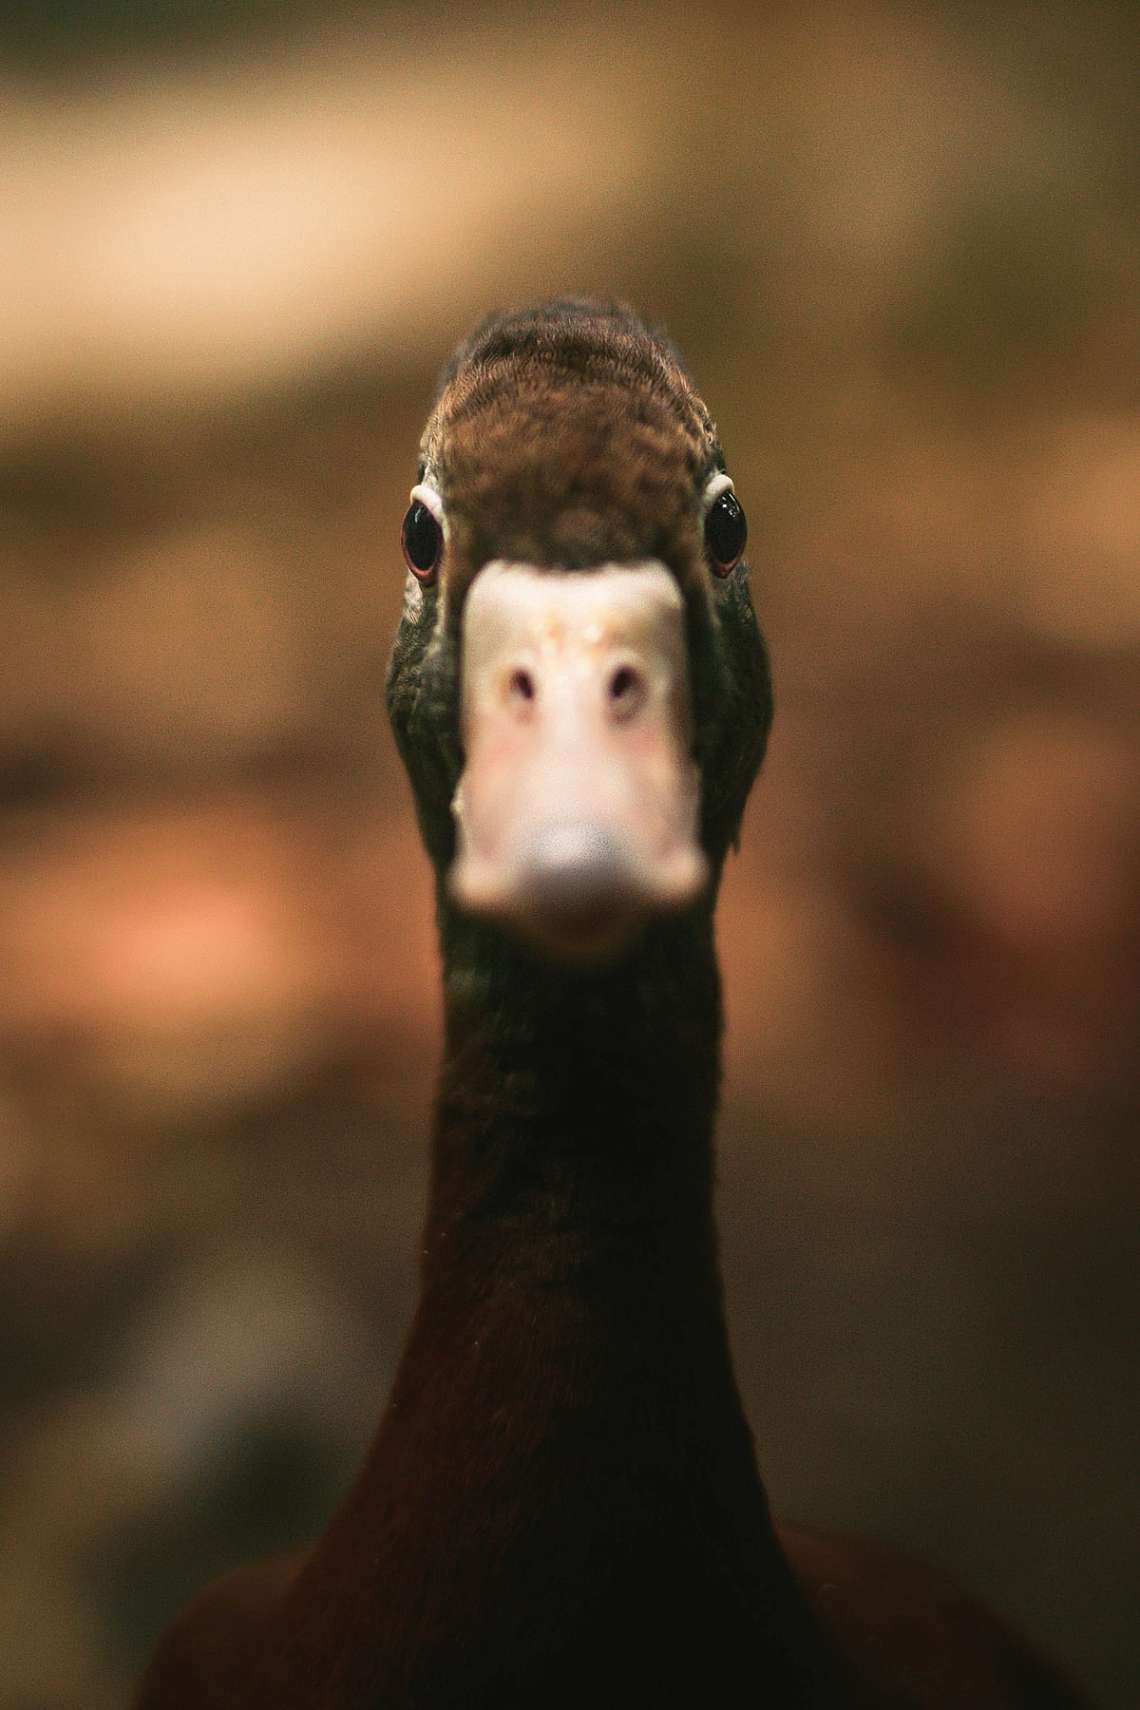 Anatidaephobia is defined as a pervasive, irrational fear that one is being watched by a duck. The anatidaephobic individual fears that no matter wher...